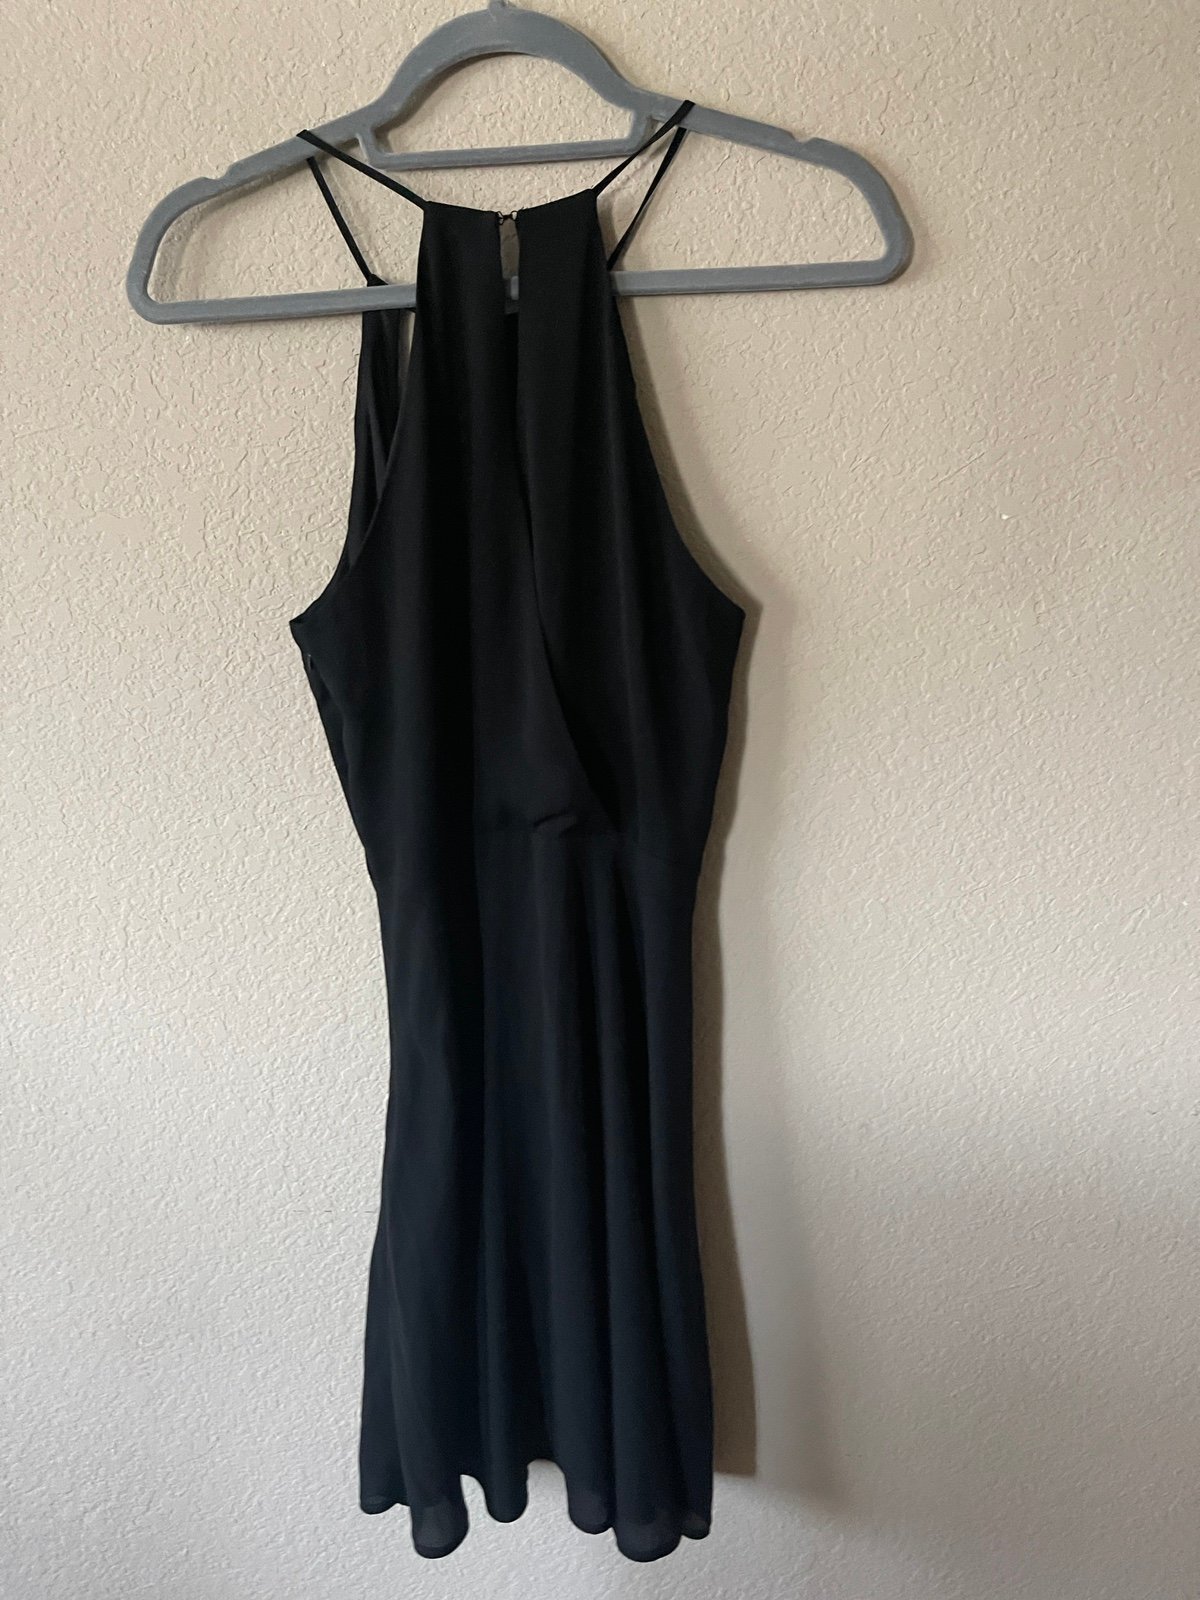 save up to 70% Express Black Dress FGC8j2aY7 New Style